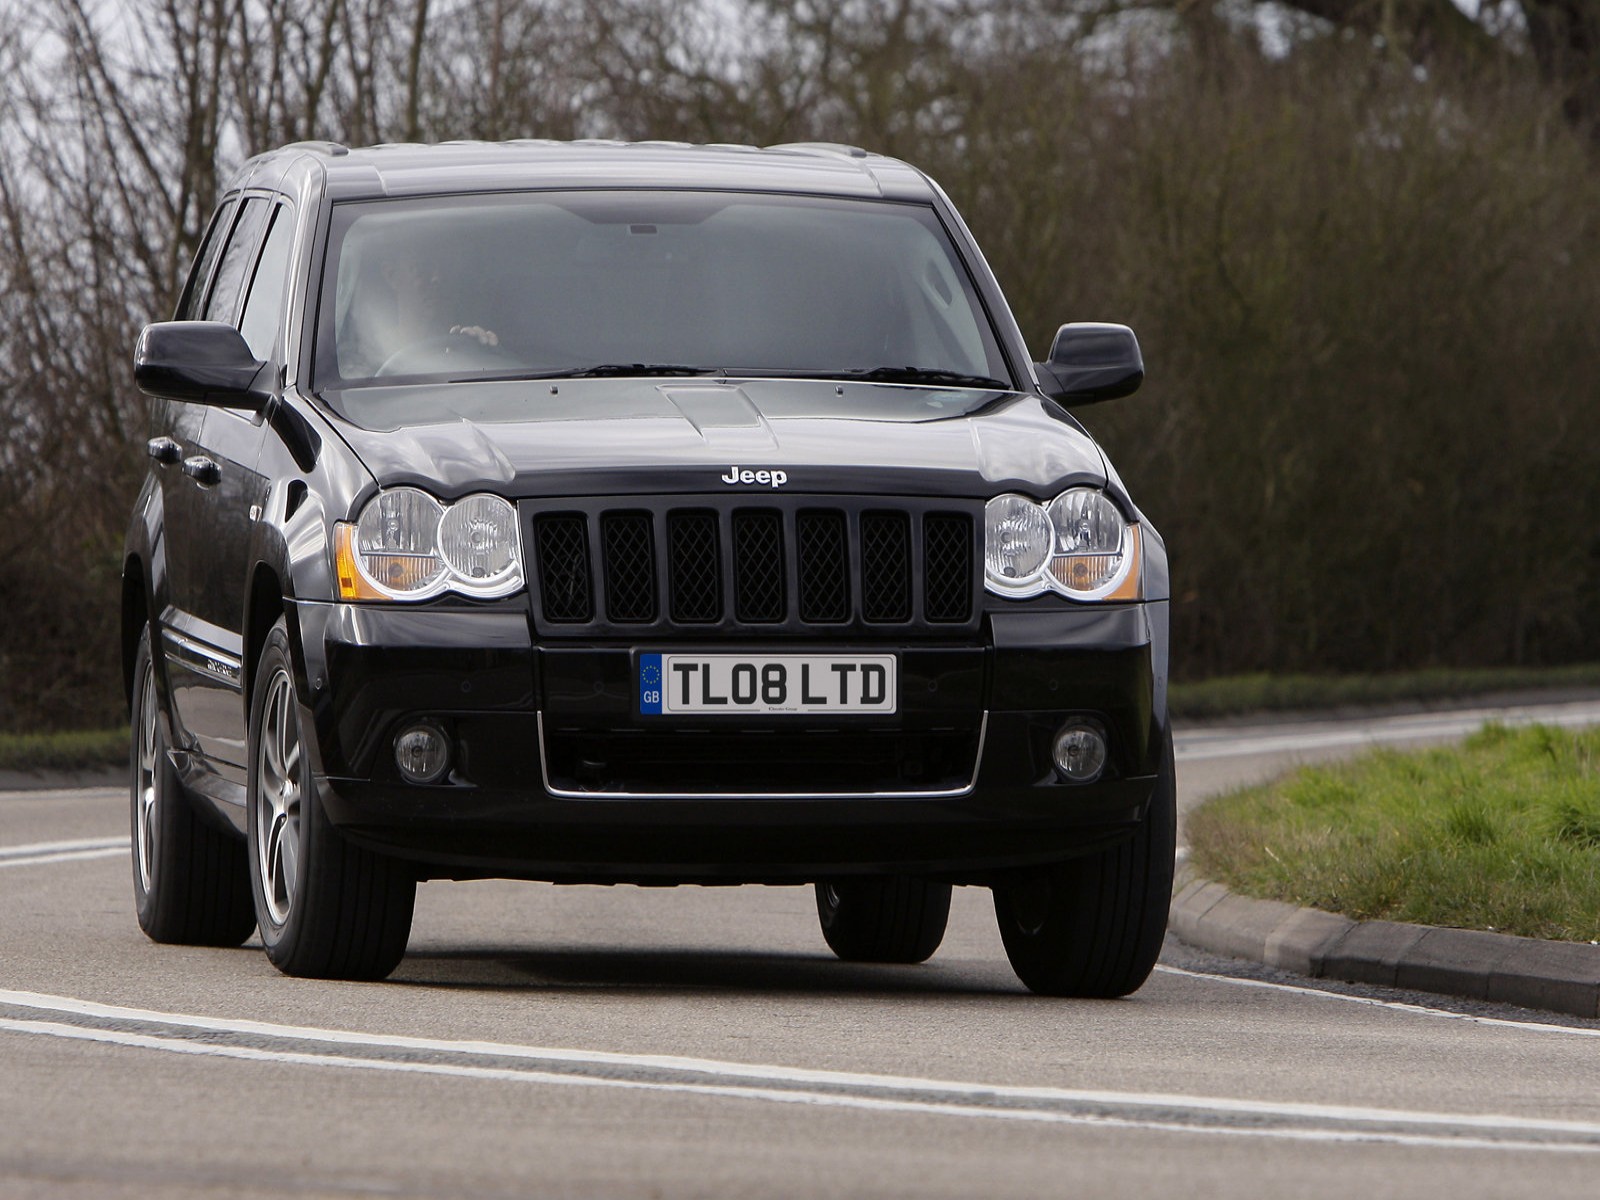 Car Pictures: Jeep Grand Cherokee S-Limited UK Version 2008